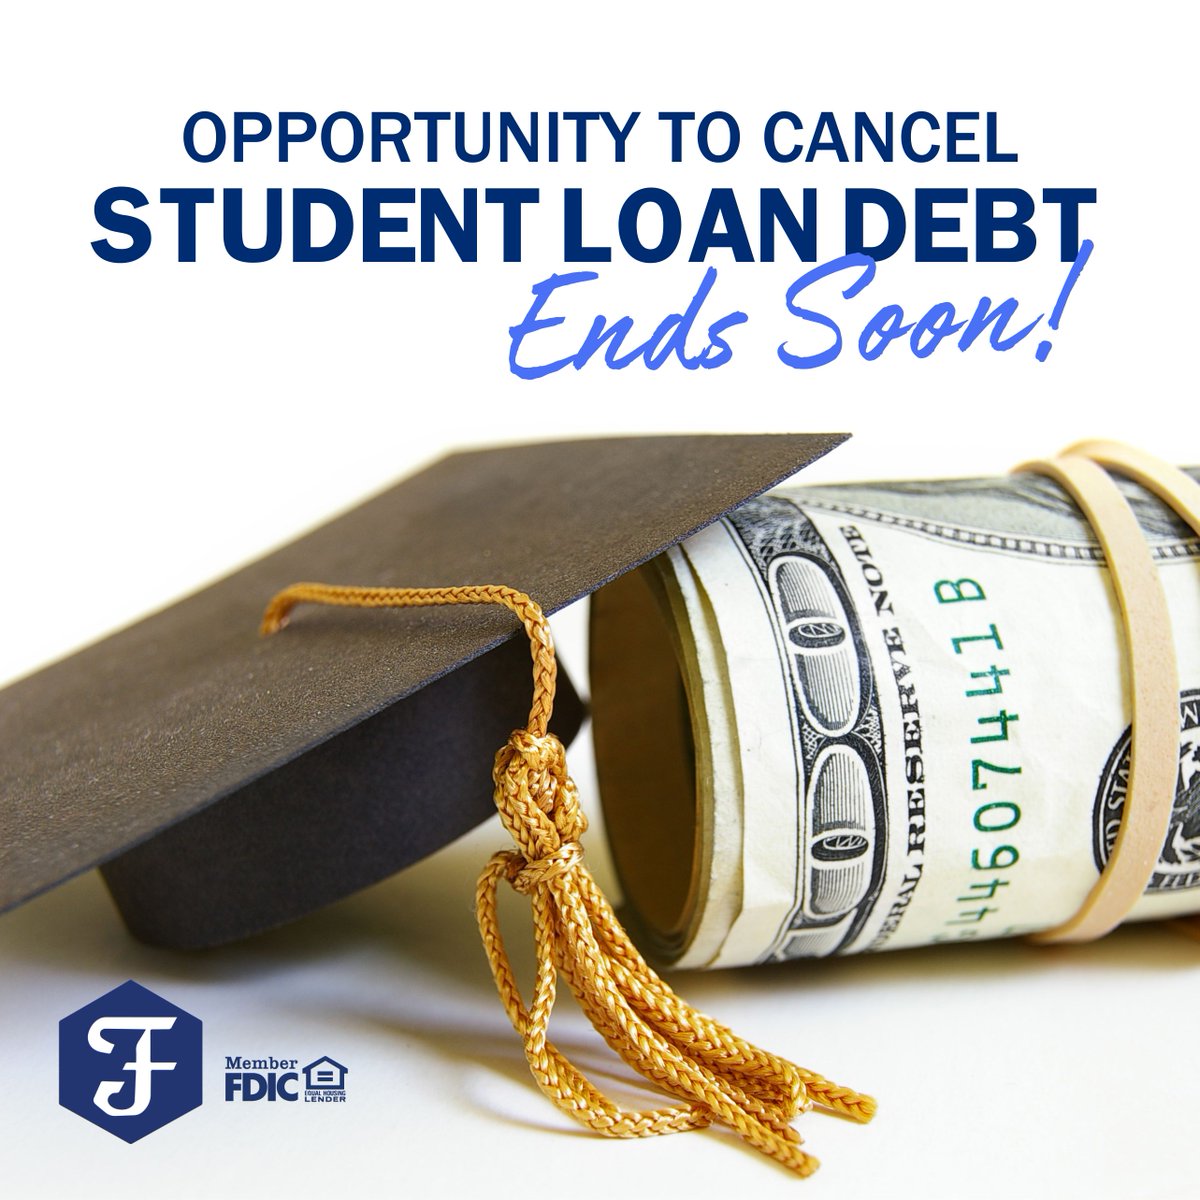 Act now! Opportunity to cancel student loan debt ends soon. Find out more at bit.ly/3TCfYSZ